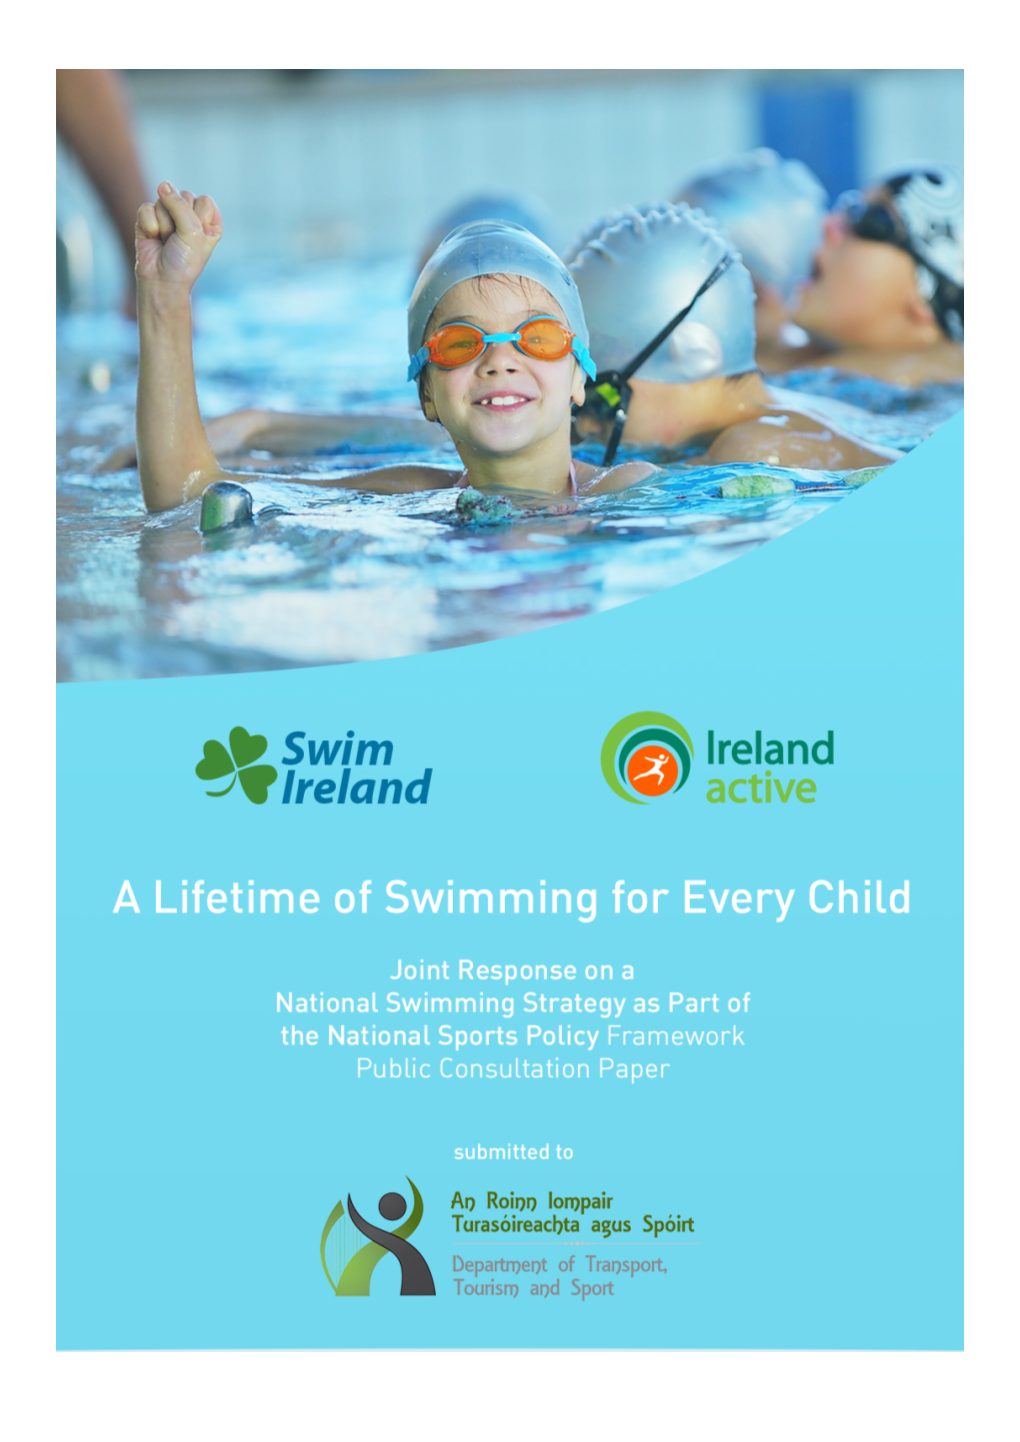 1.1 Swim Ireland Swim Ireland Is the National Governing Body for Swimming, Water-Polo, Diving and Associated Aquatic Disciplines in Ireland